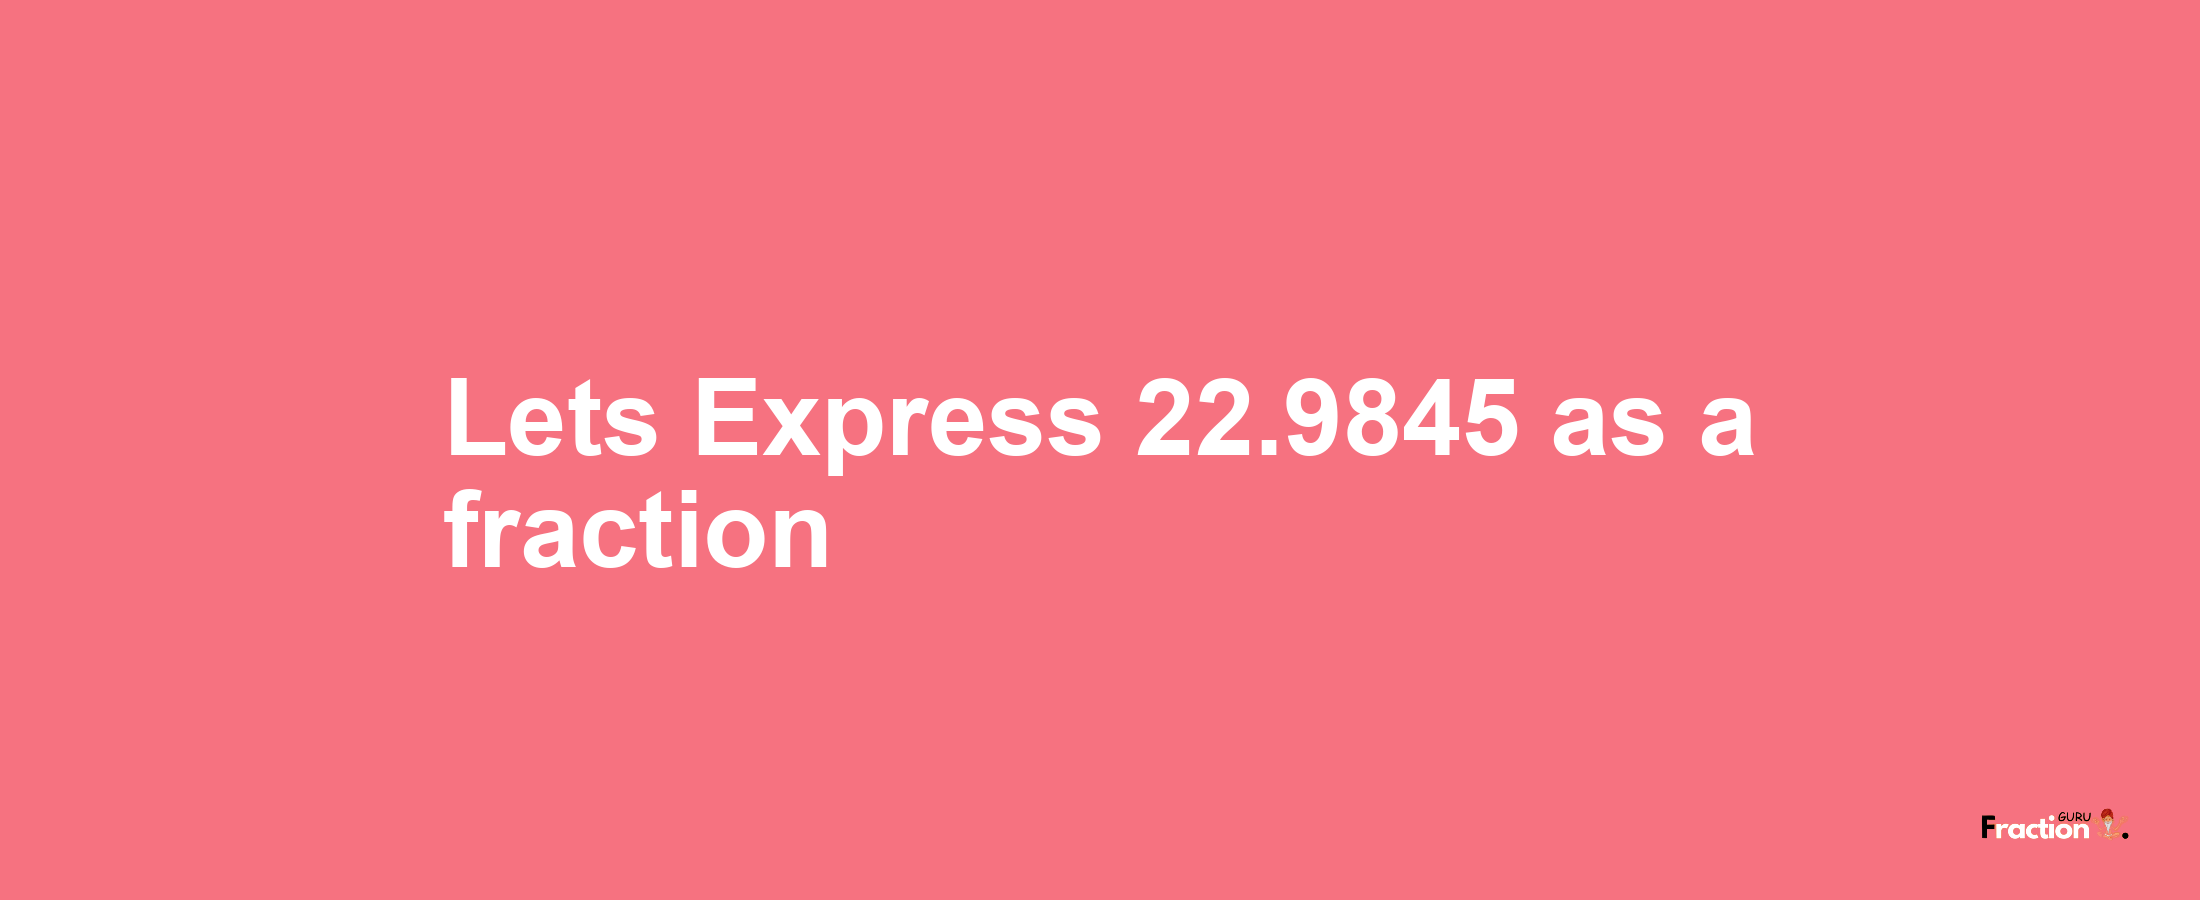 Lets Express 22.9845 as afraction